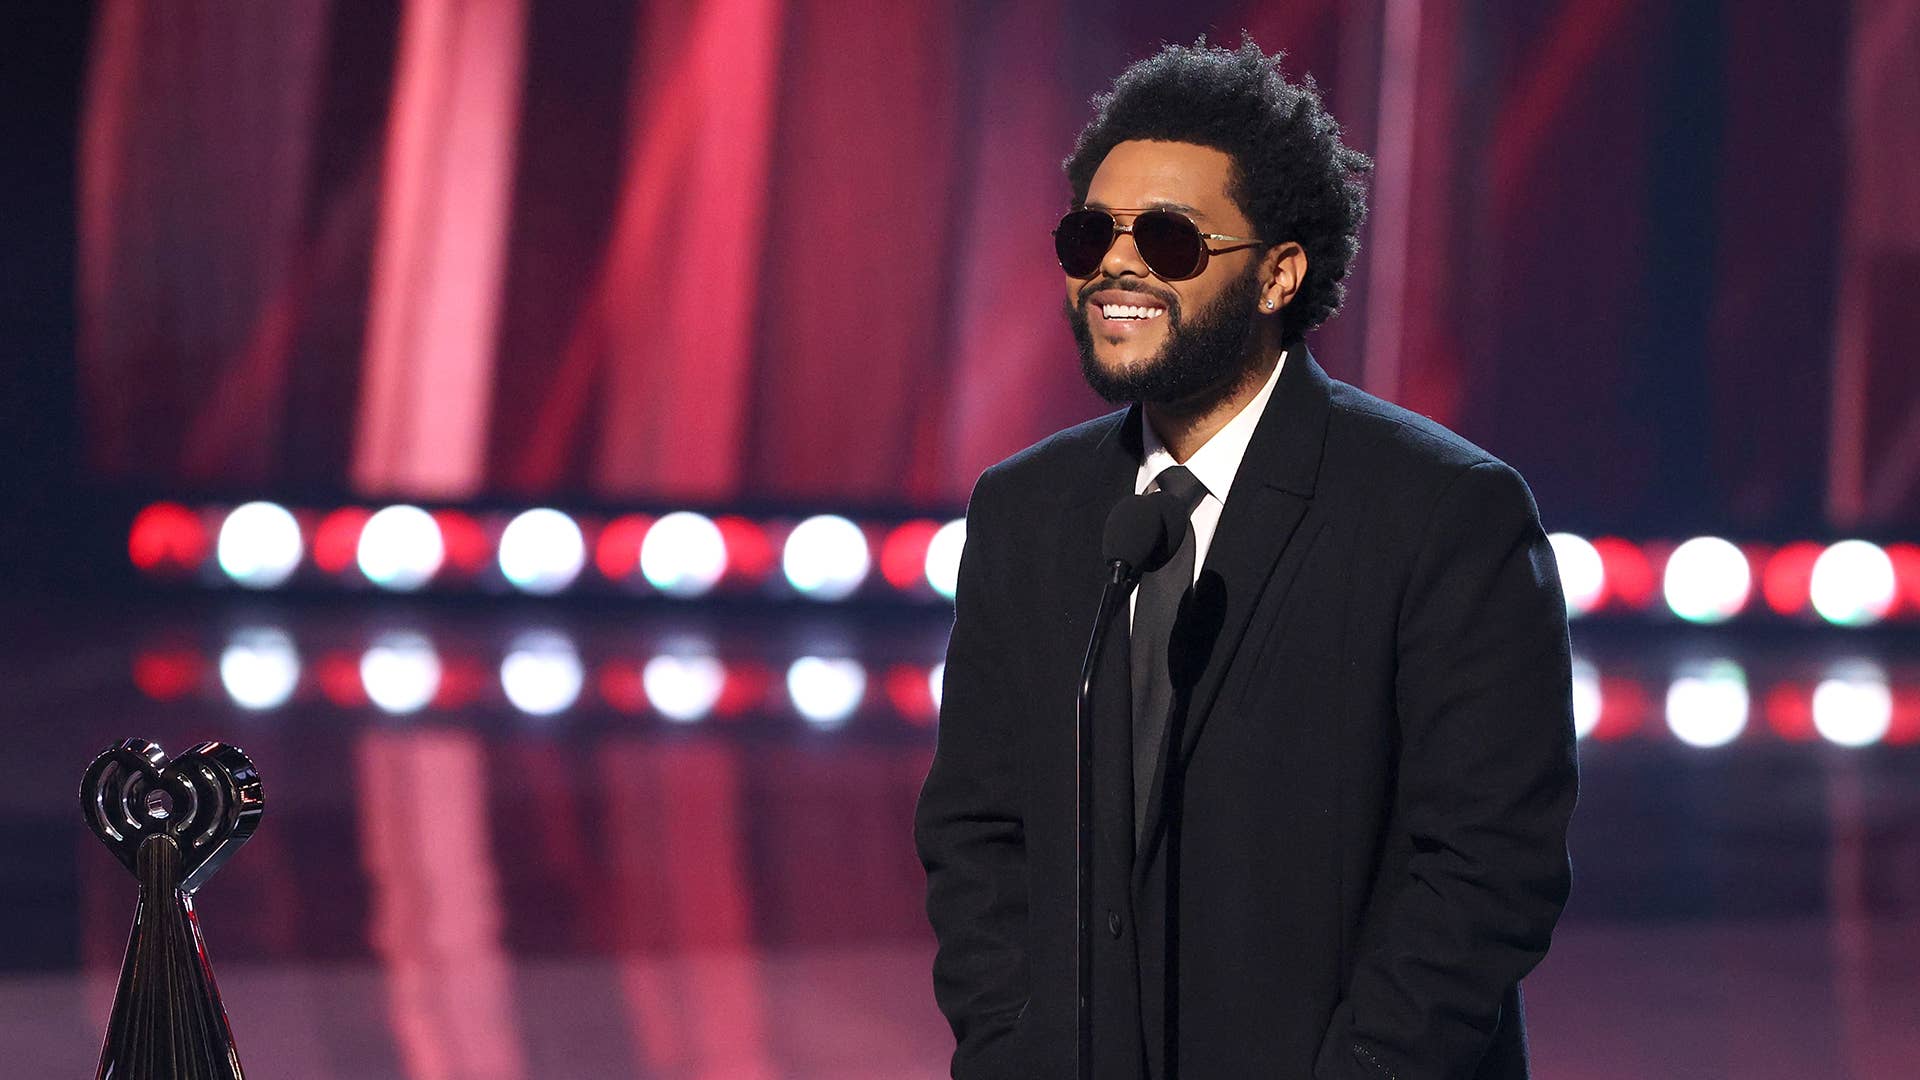 The Weeknd and Angelina Jolie Spark Rumors After Being Spotted Together in  L.A.